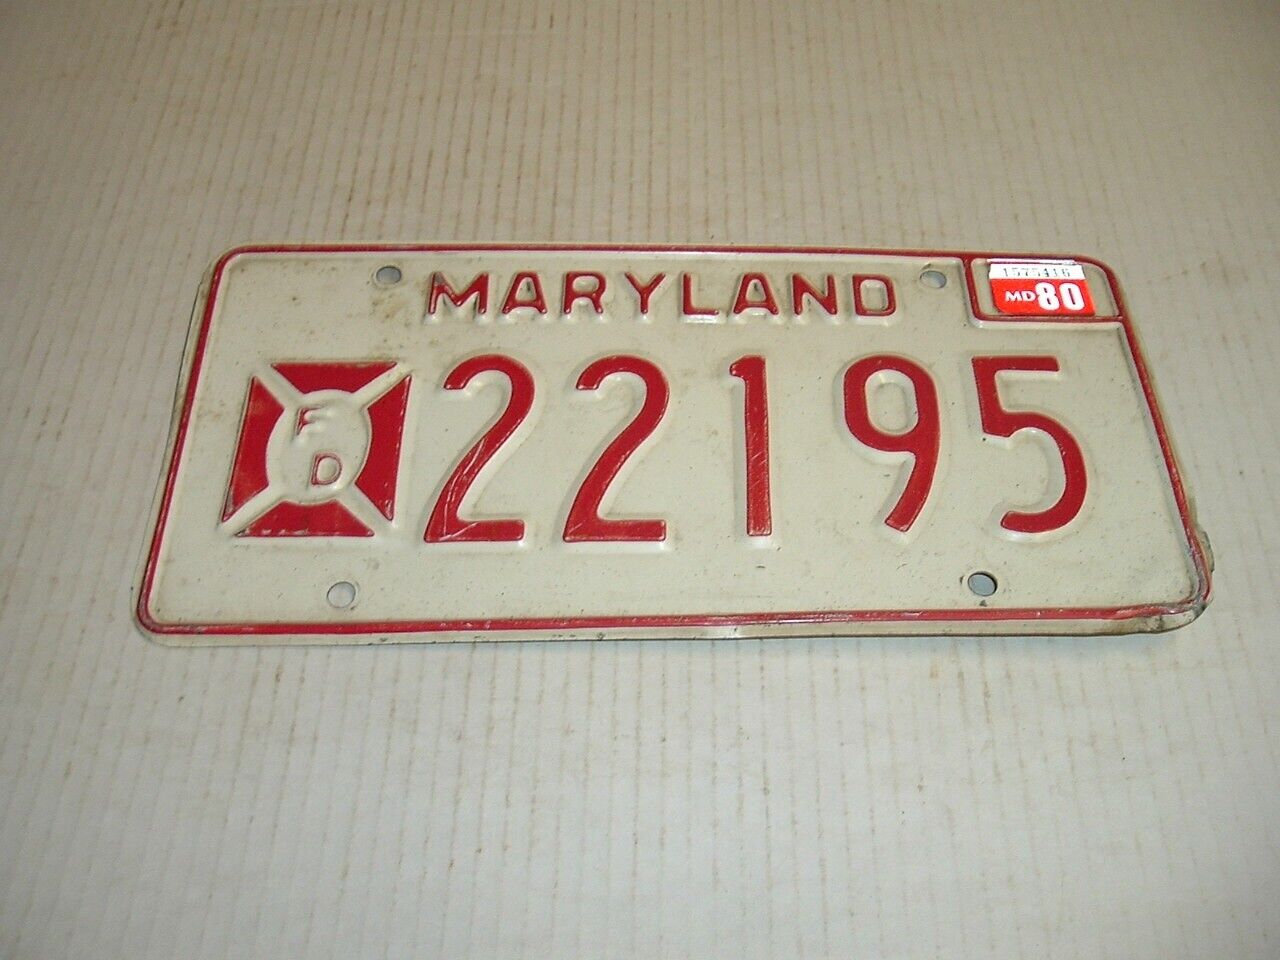 Maryland 1980 FD Fire Department License Plate 22195